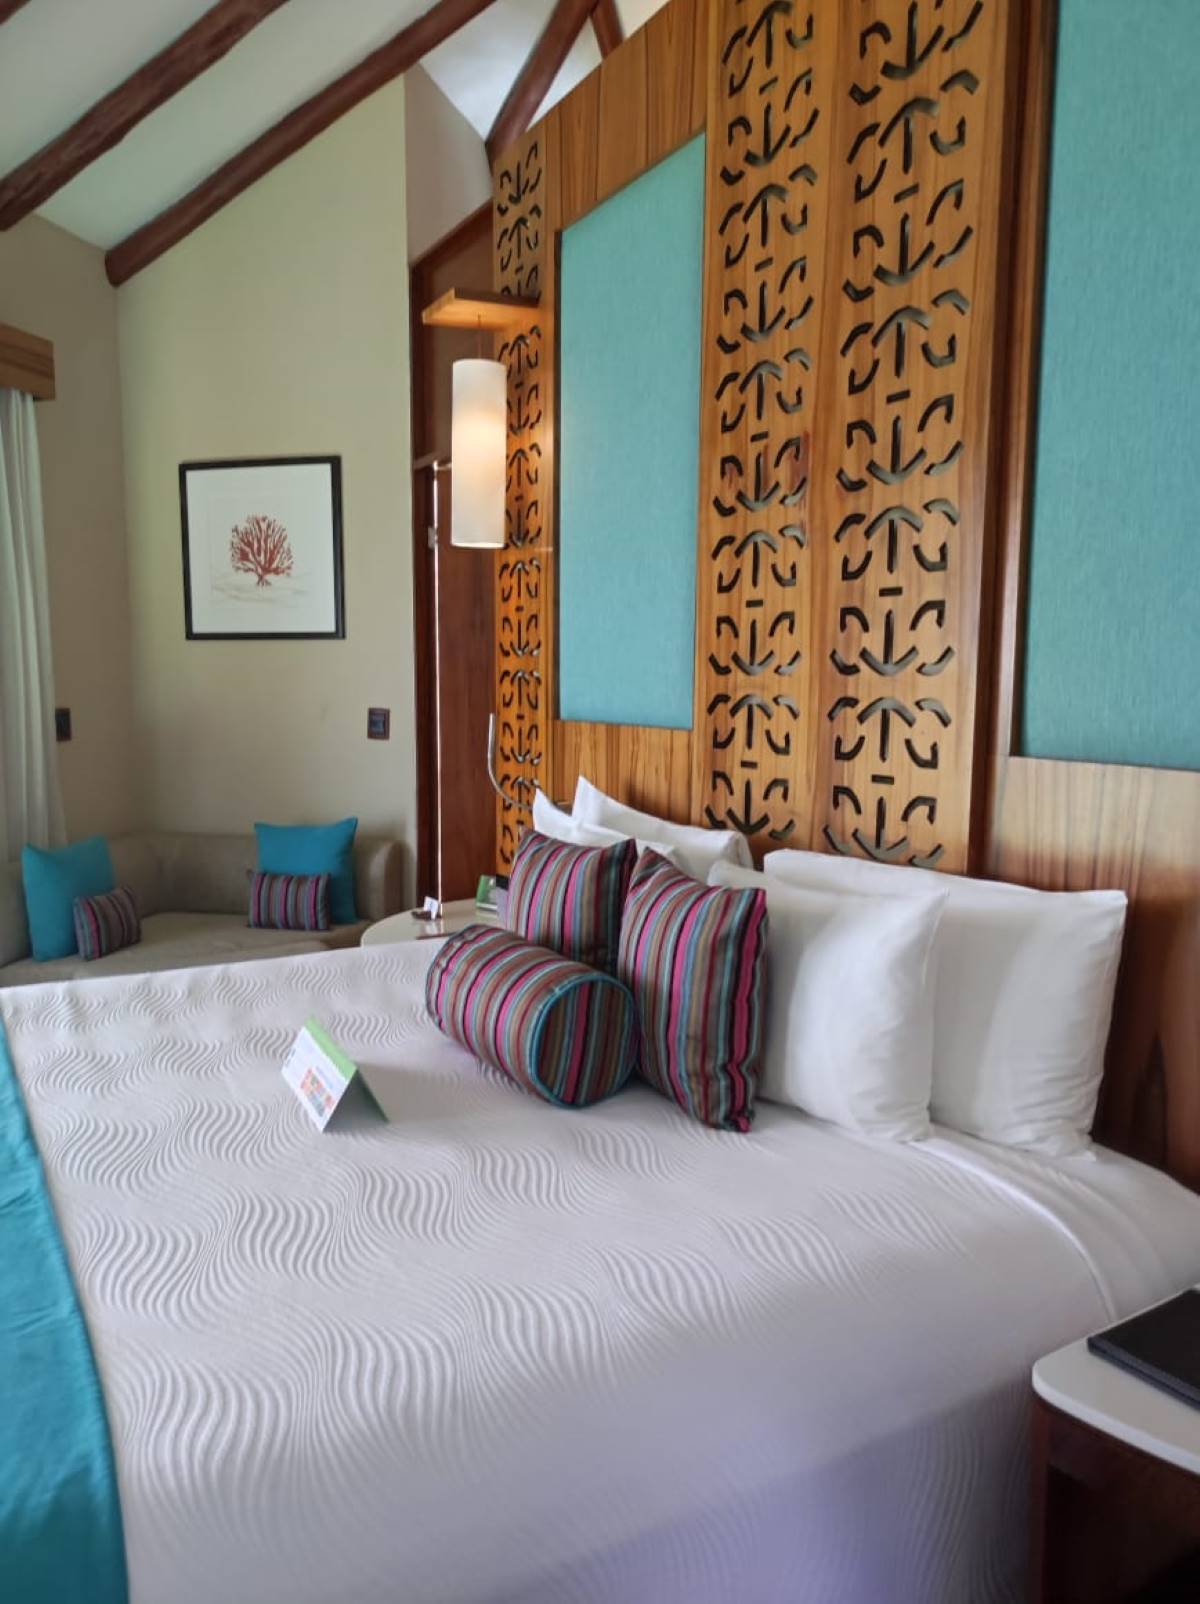 Hotel suite with a king size bed and colored cushions and wooden details